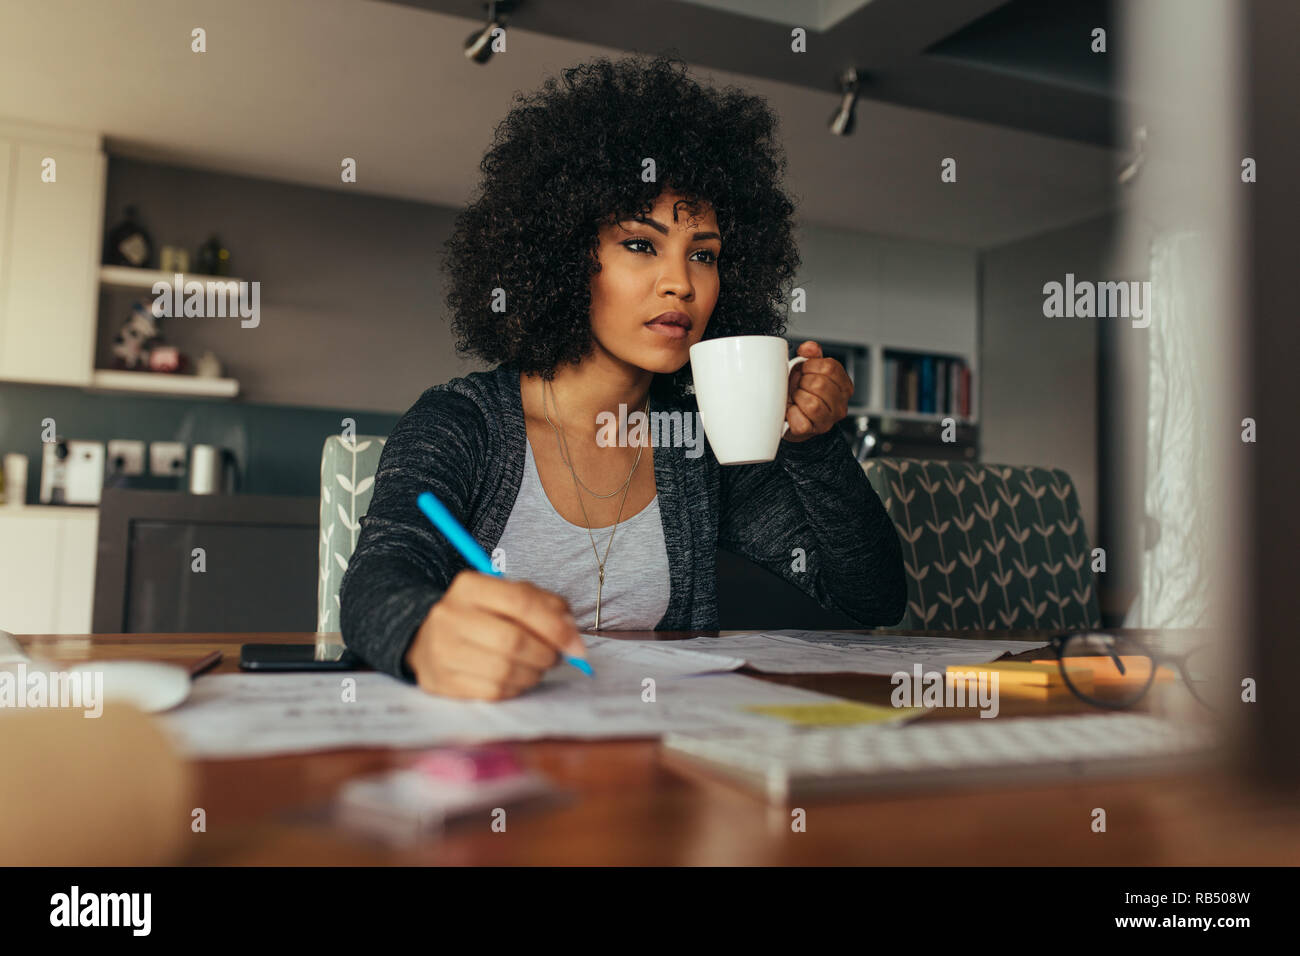 African woman working at her desk making notes looking at computer monitor and drinking coffee. Female architect working at her home office desk. Stock Photo